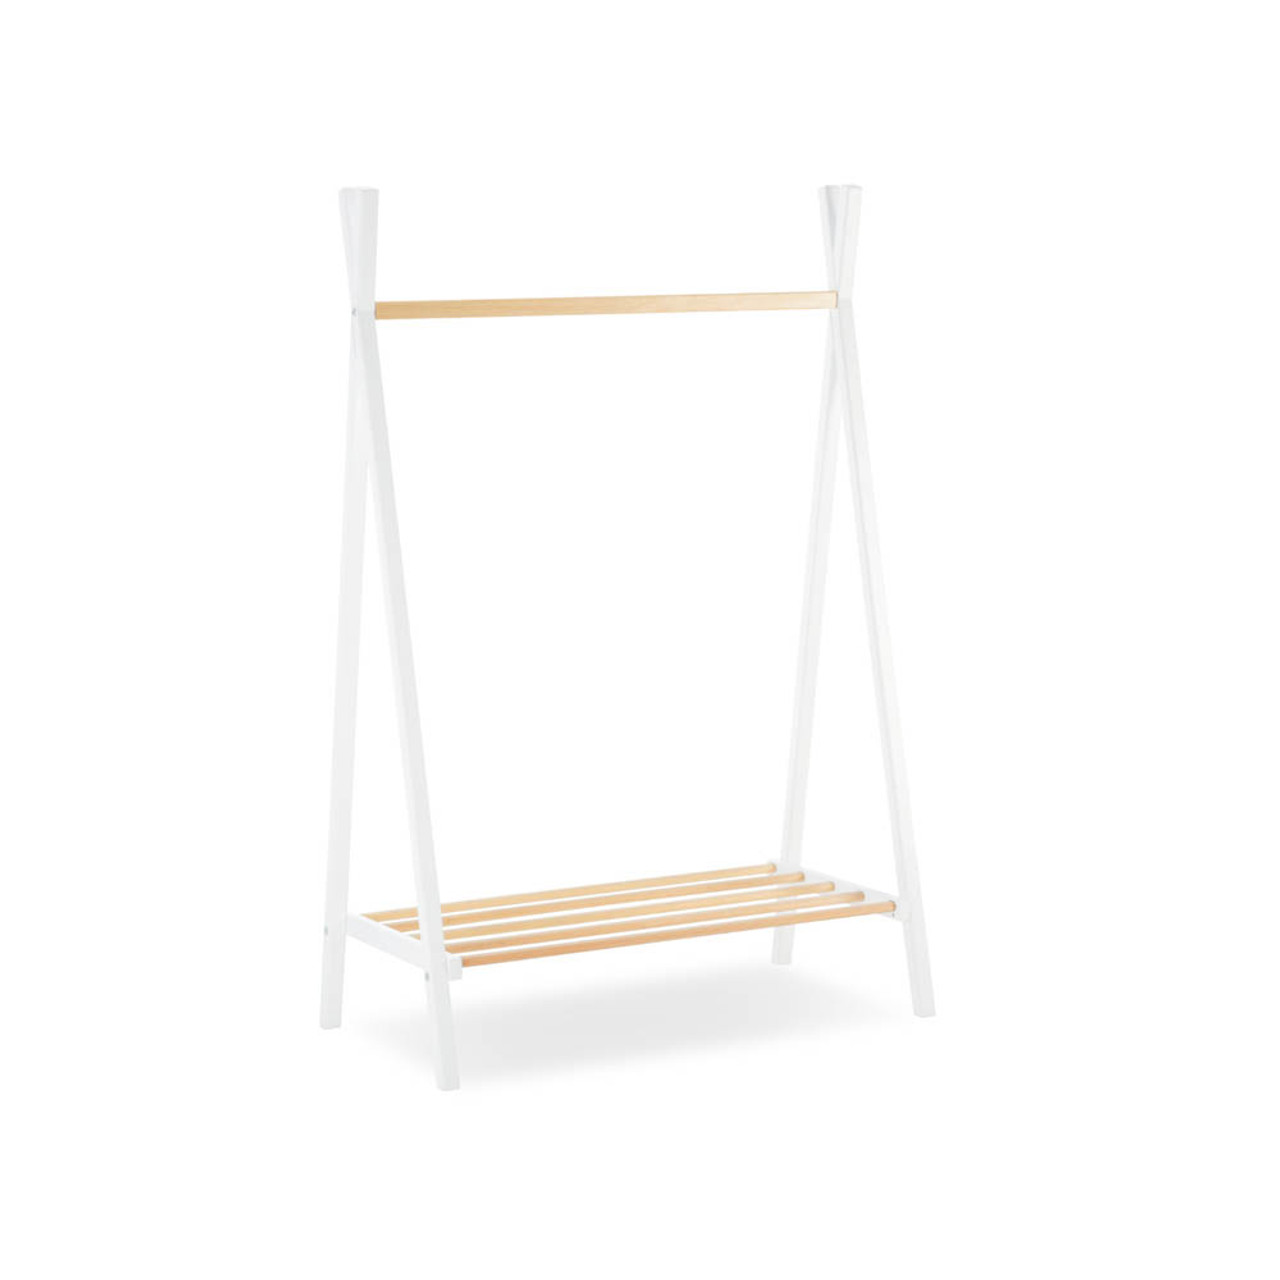 CuddleCo Nola Clothes Rail White/Natural from Olivers Baby Care